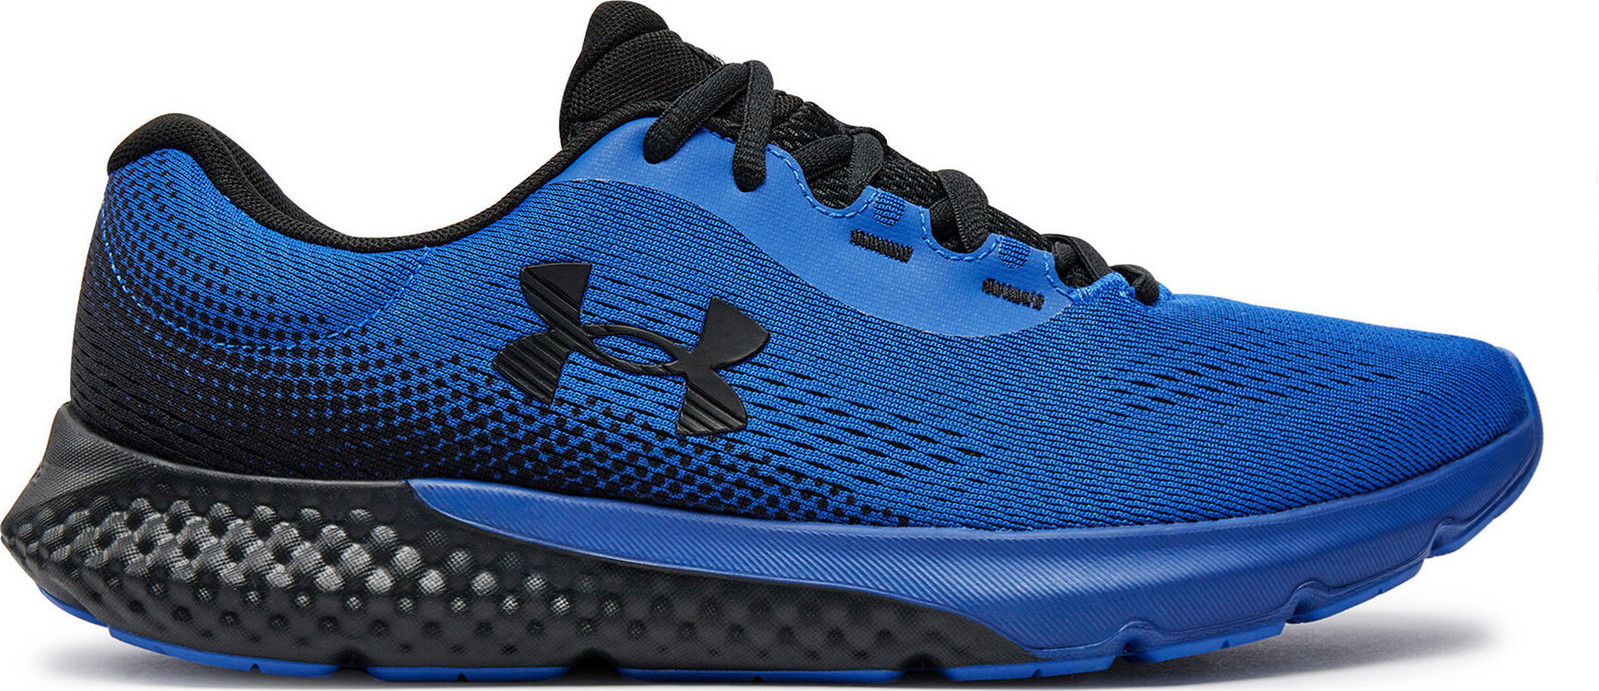 Boty Under Armour Ua Charged Rogue 4 3026998-400 Team Royal/Black/Black